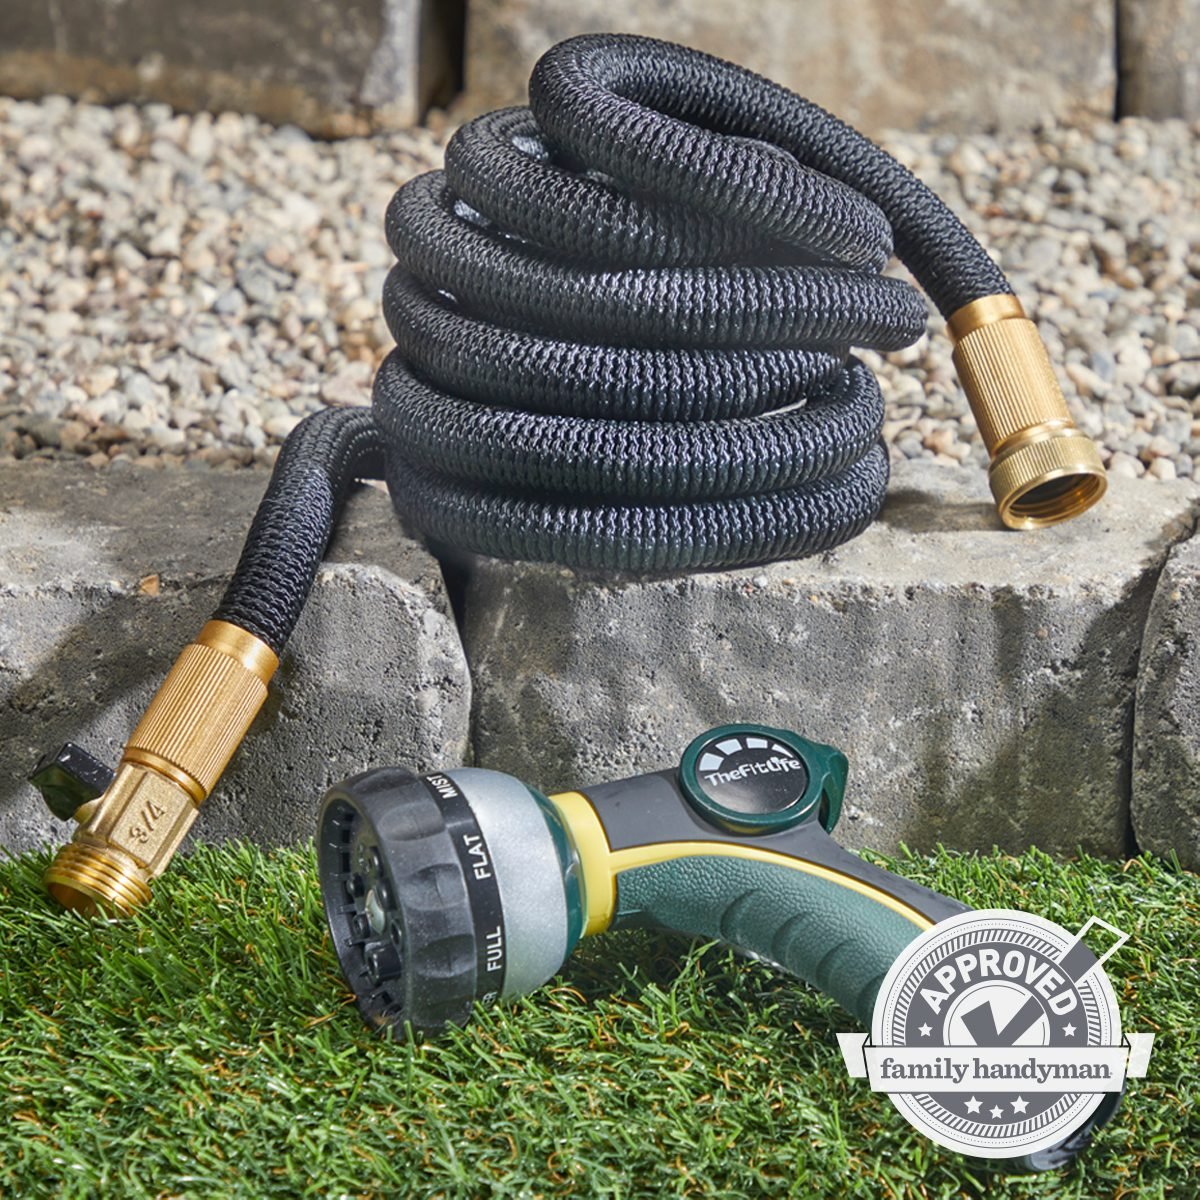 Fitlife Expandable Garden Hose Review: Is it the Best Among Expandable Garden Hoses?